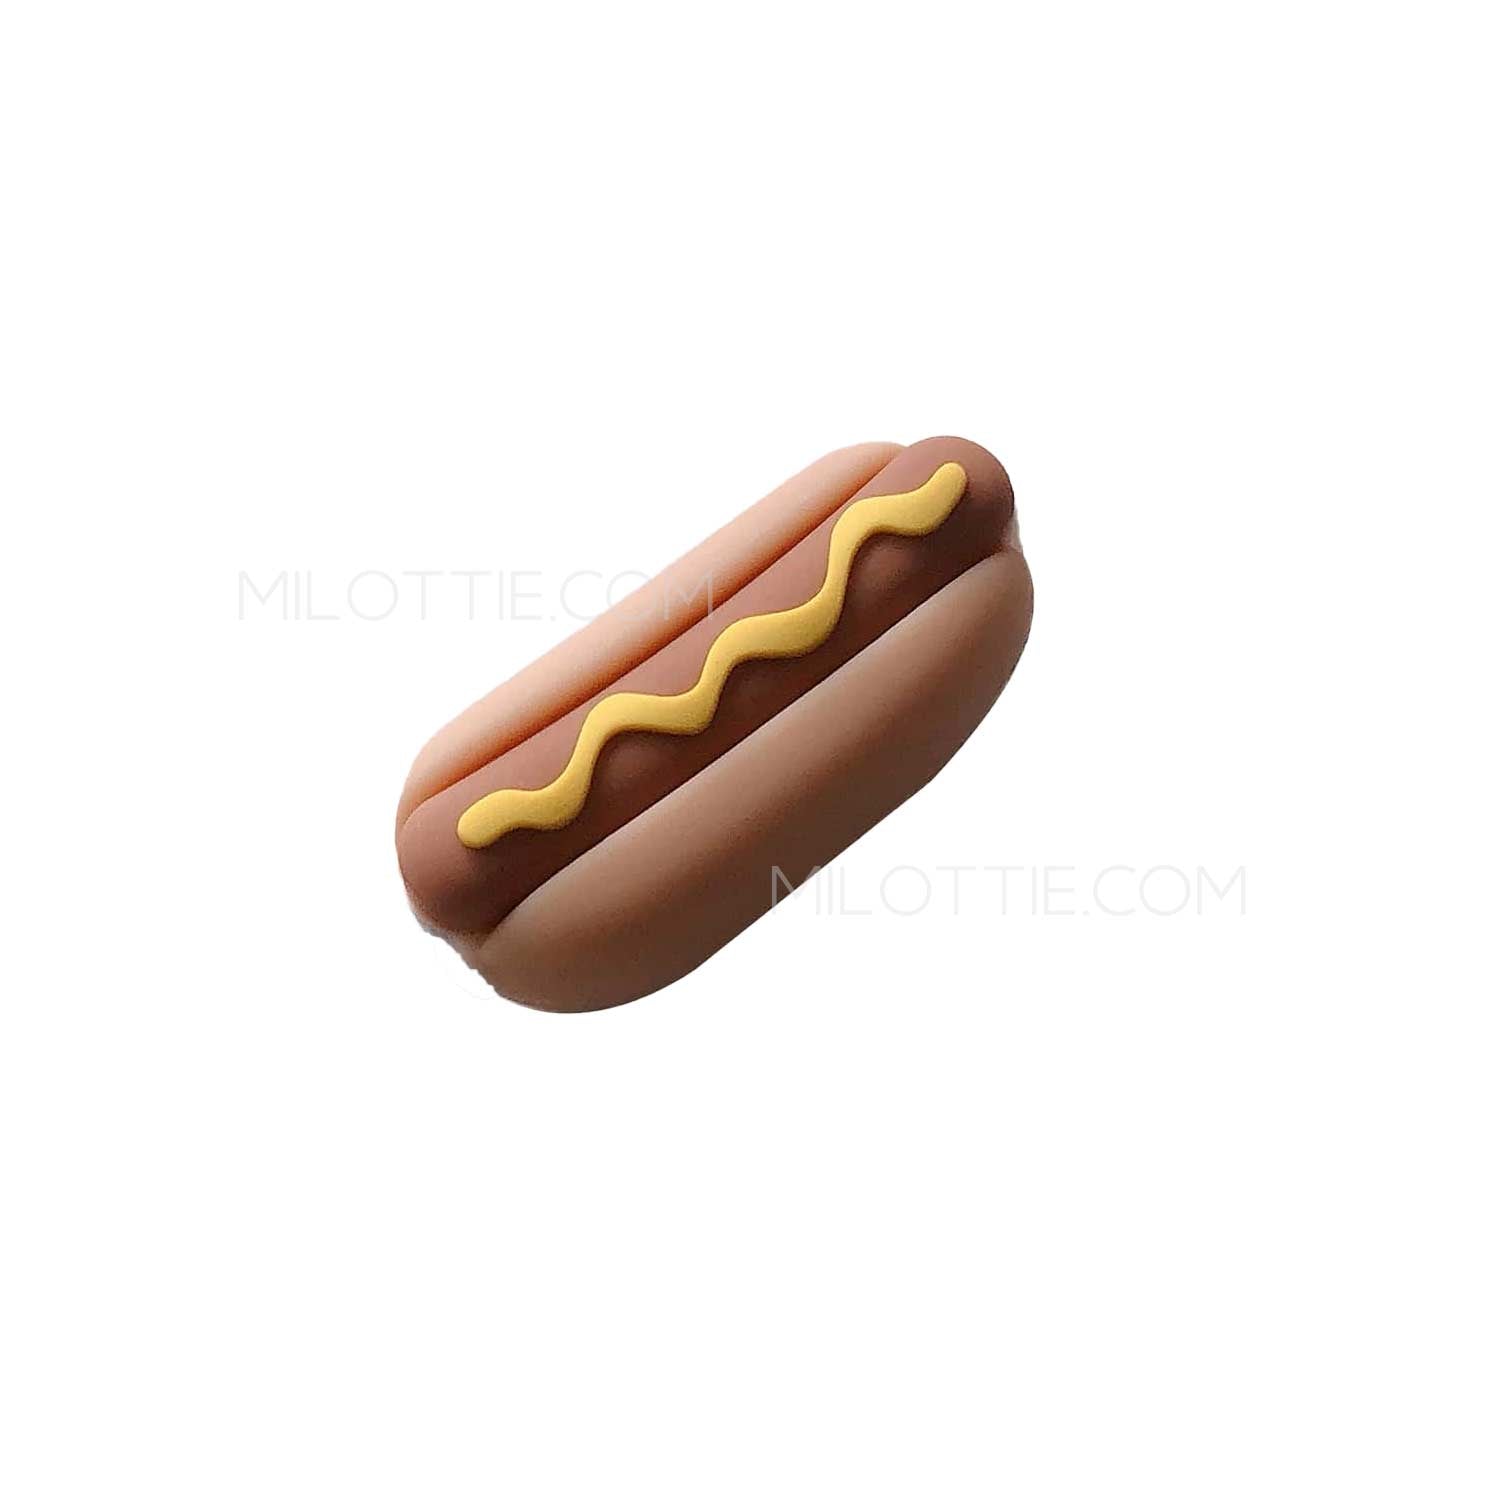 Hot dog cable protector - Milottie